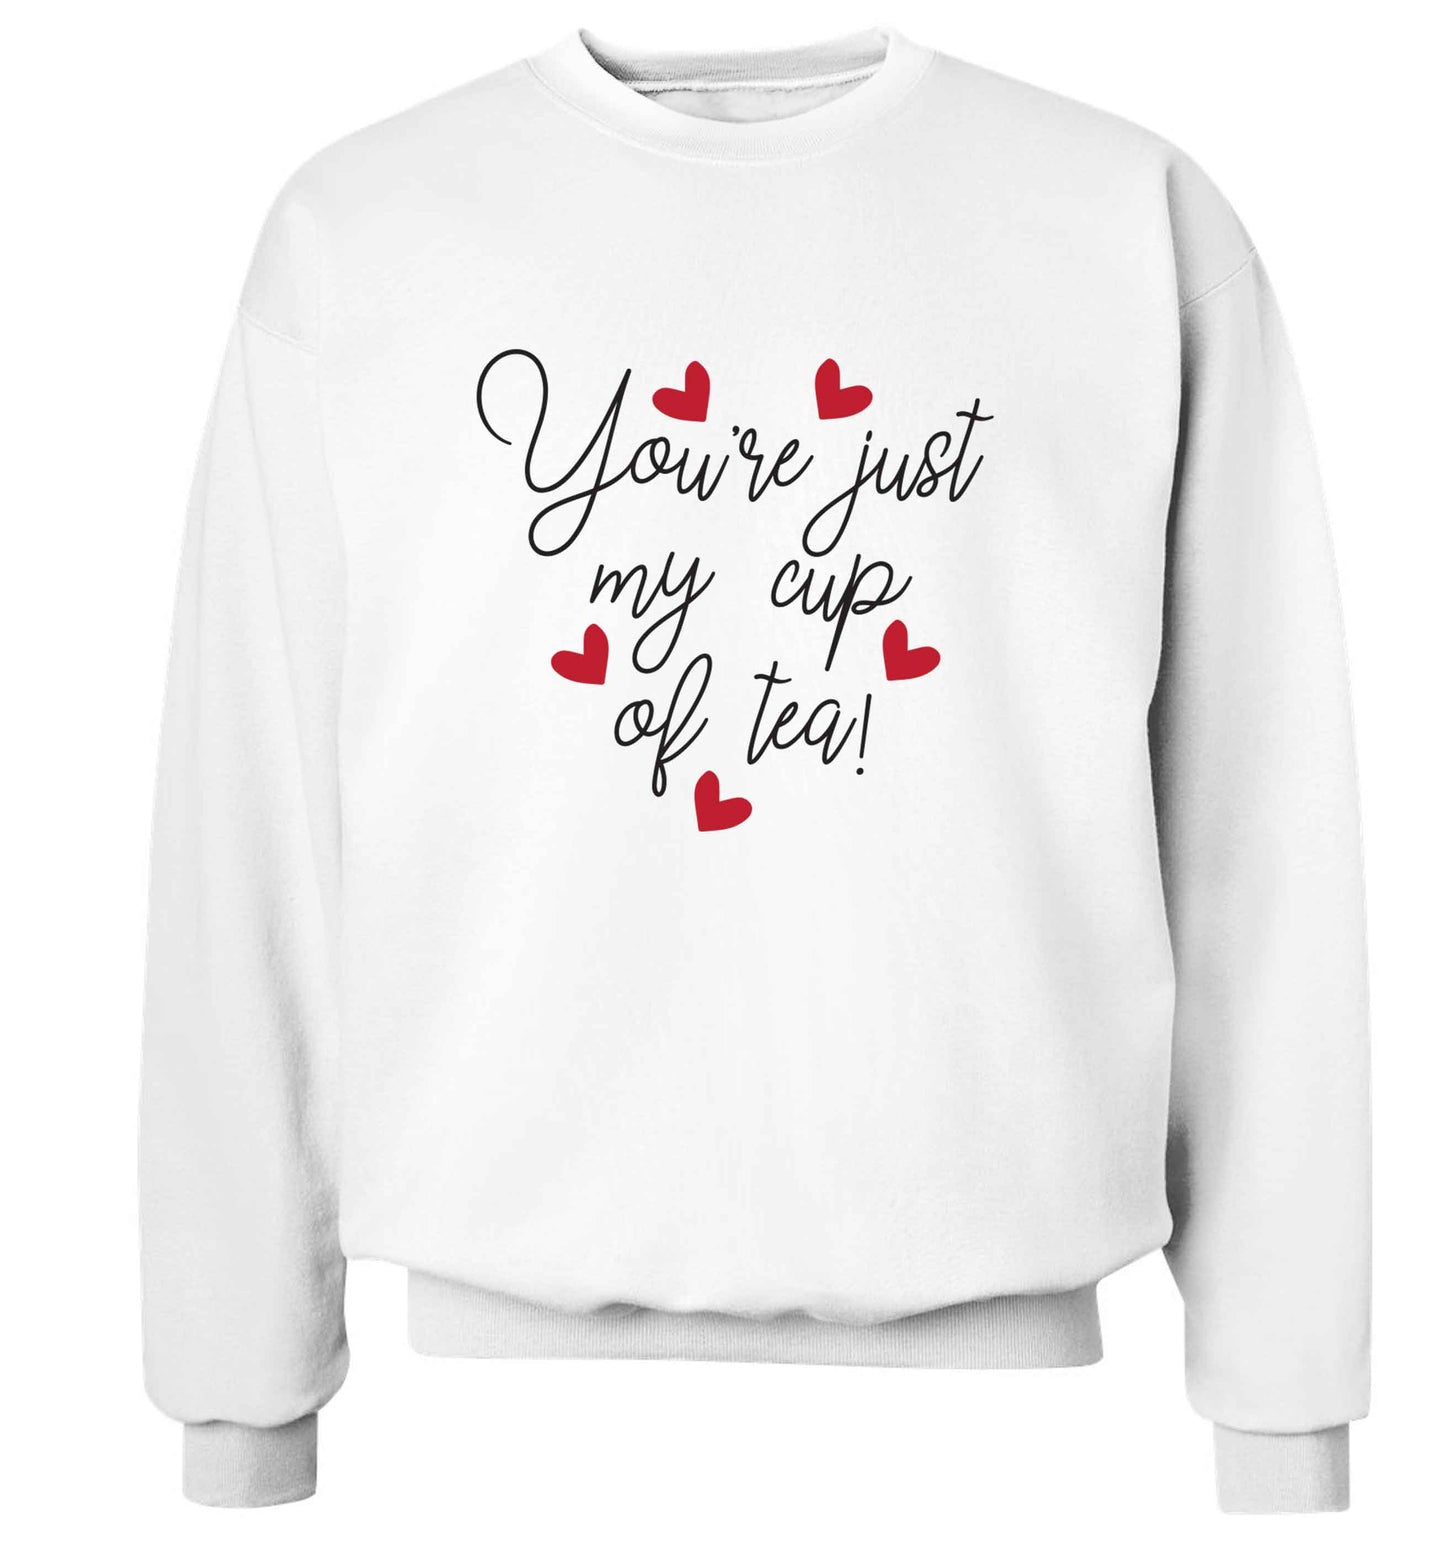 You're just my cup of tea adult's unisex white sweater 2XL